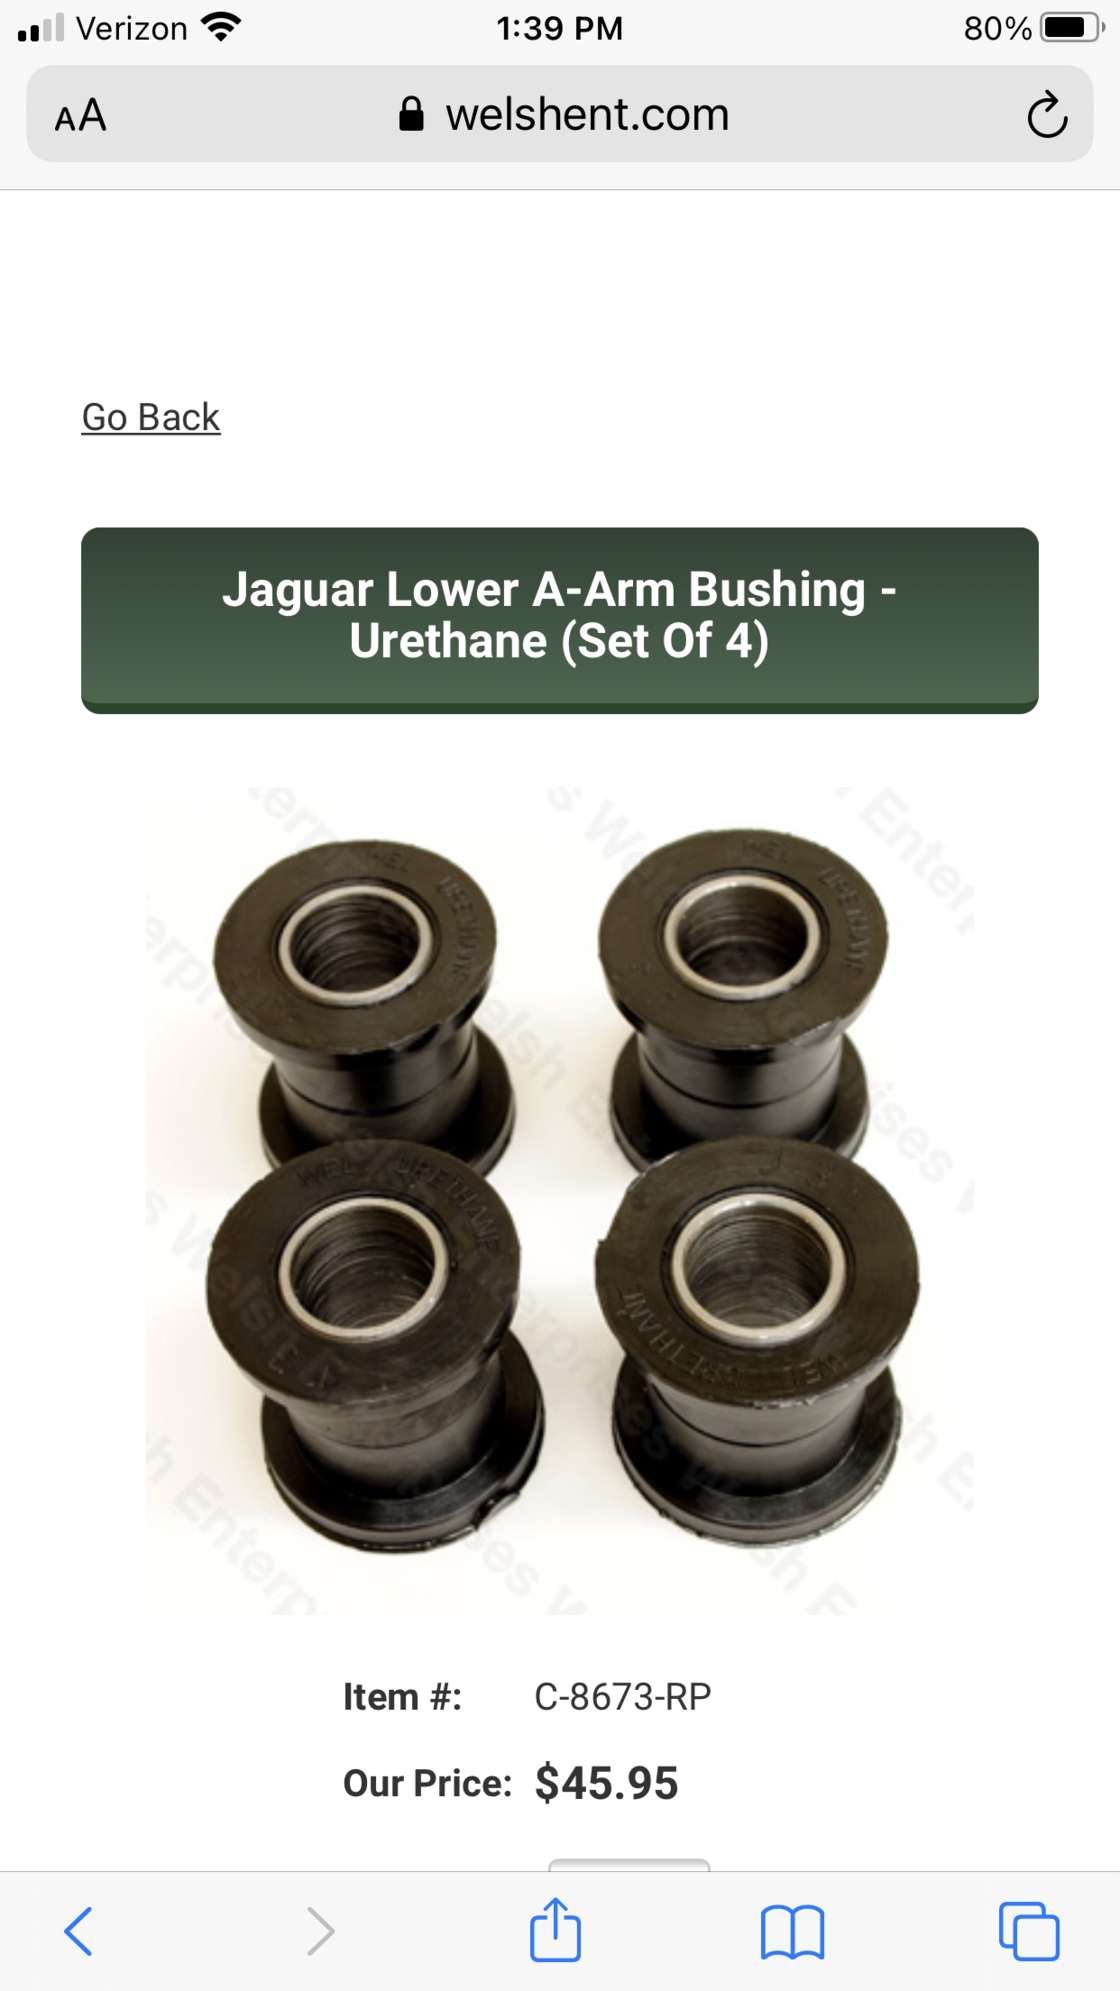 Steering/Suspension - Jaguar xj6 ball joints and bushings ( New ) - New - 1977 to 1987 Jaguar XJ - Canonsburg, PA 15317, United States